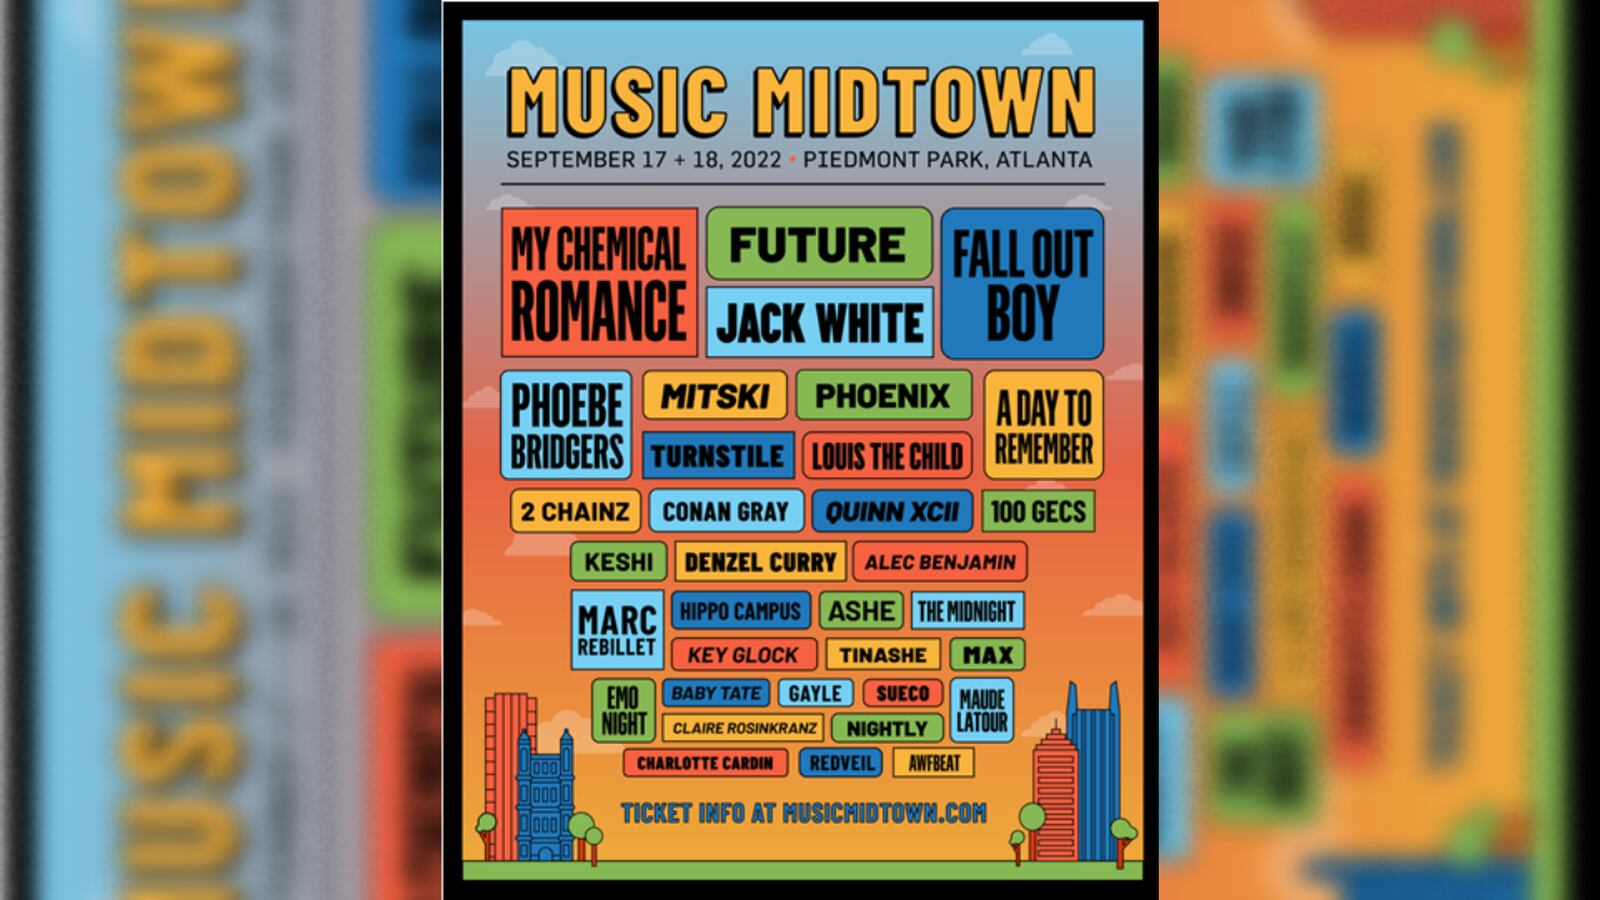 Music Midtown releases full lineup for this year’s festival at Piedmont